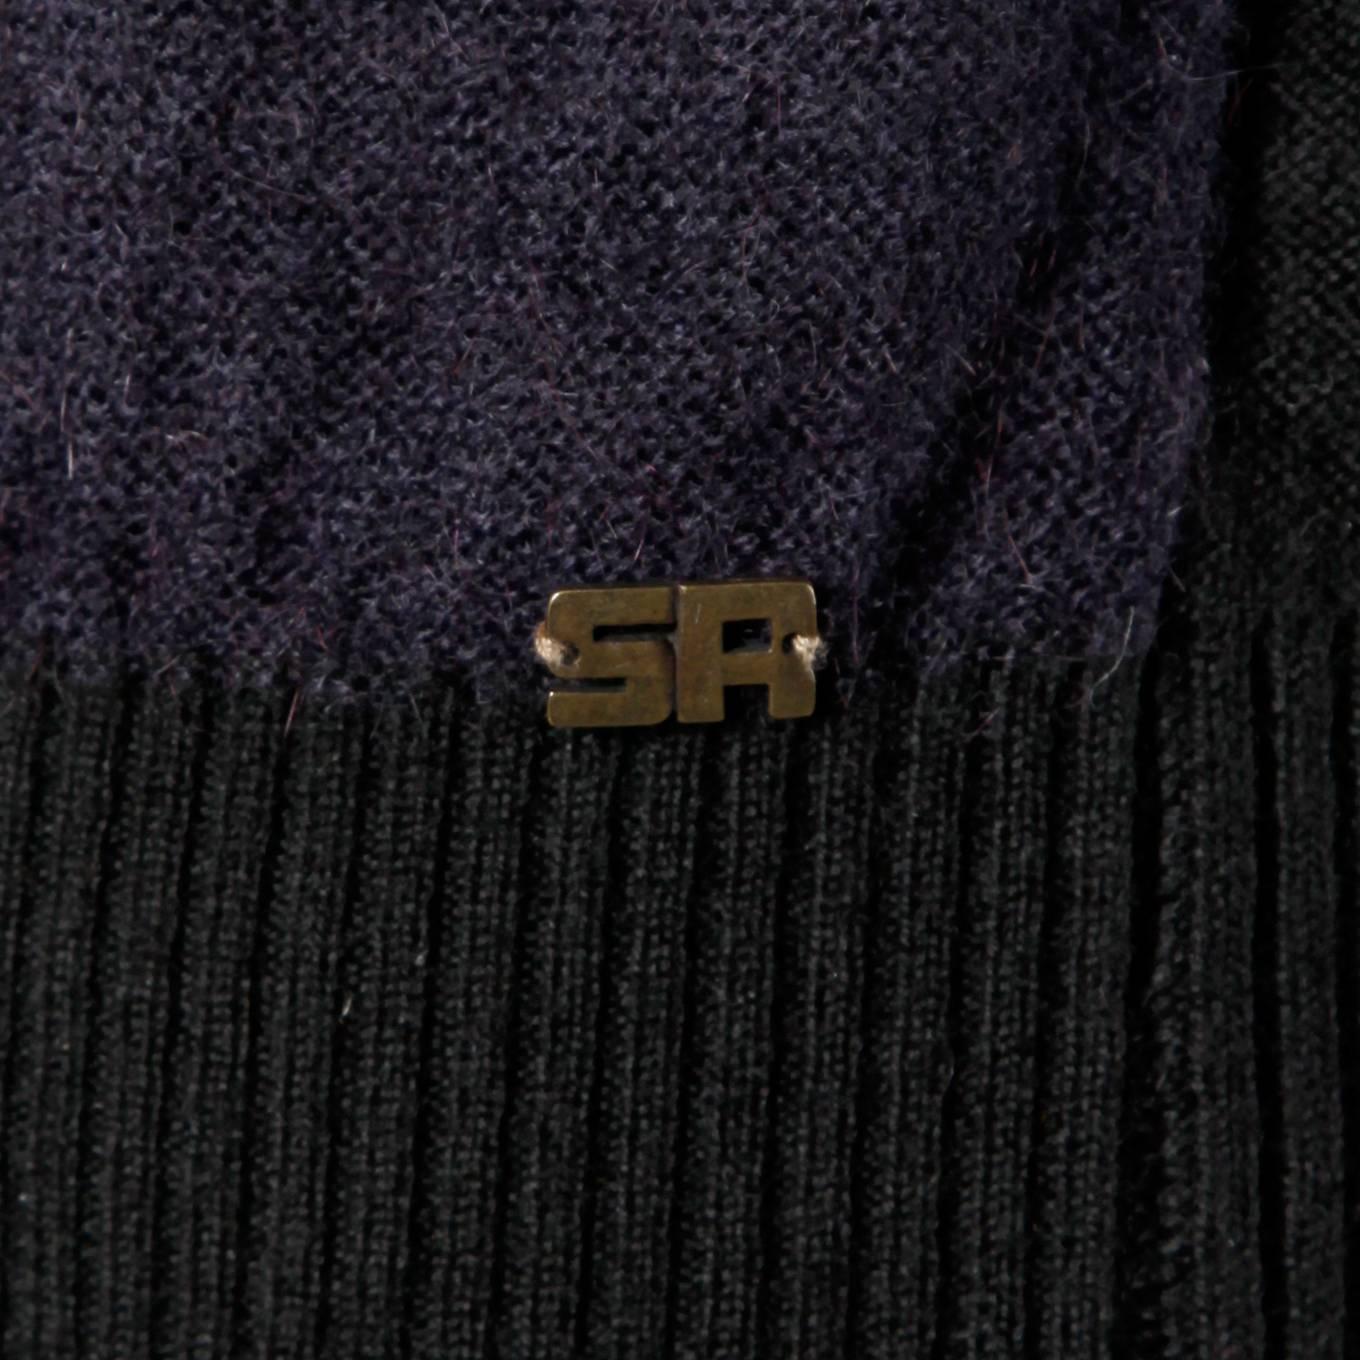 Sonia Rykiel Wool Cashmere Blend Knit Turtle Neck Sweater with Geometric Design 2